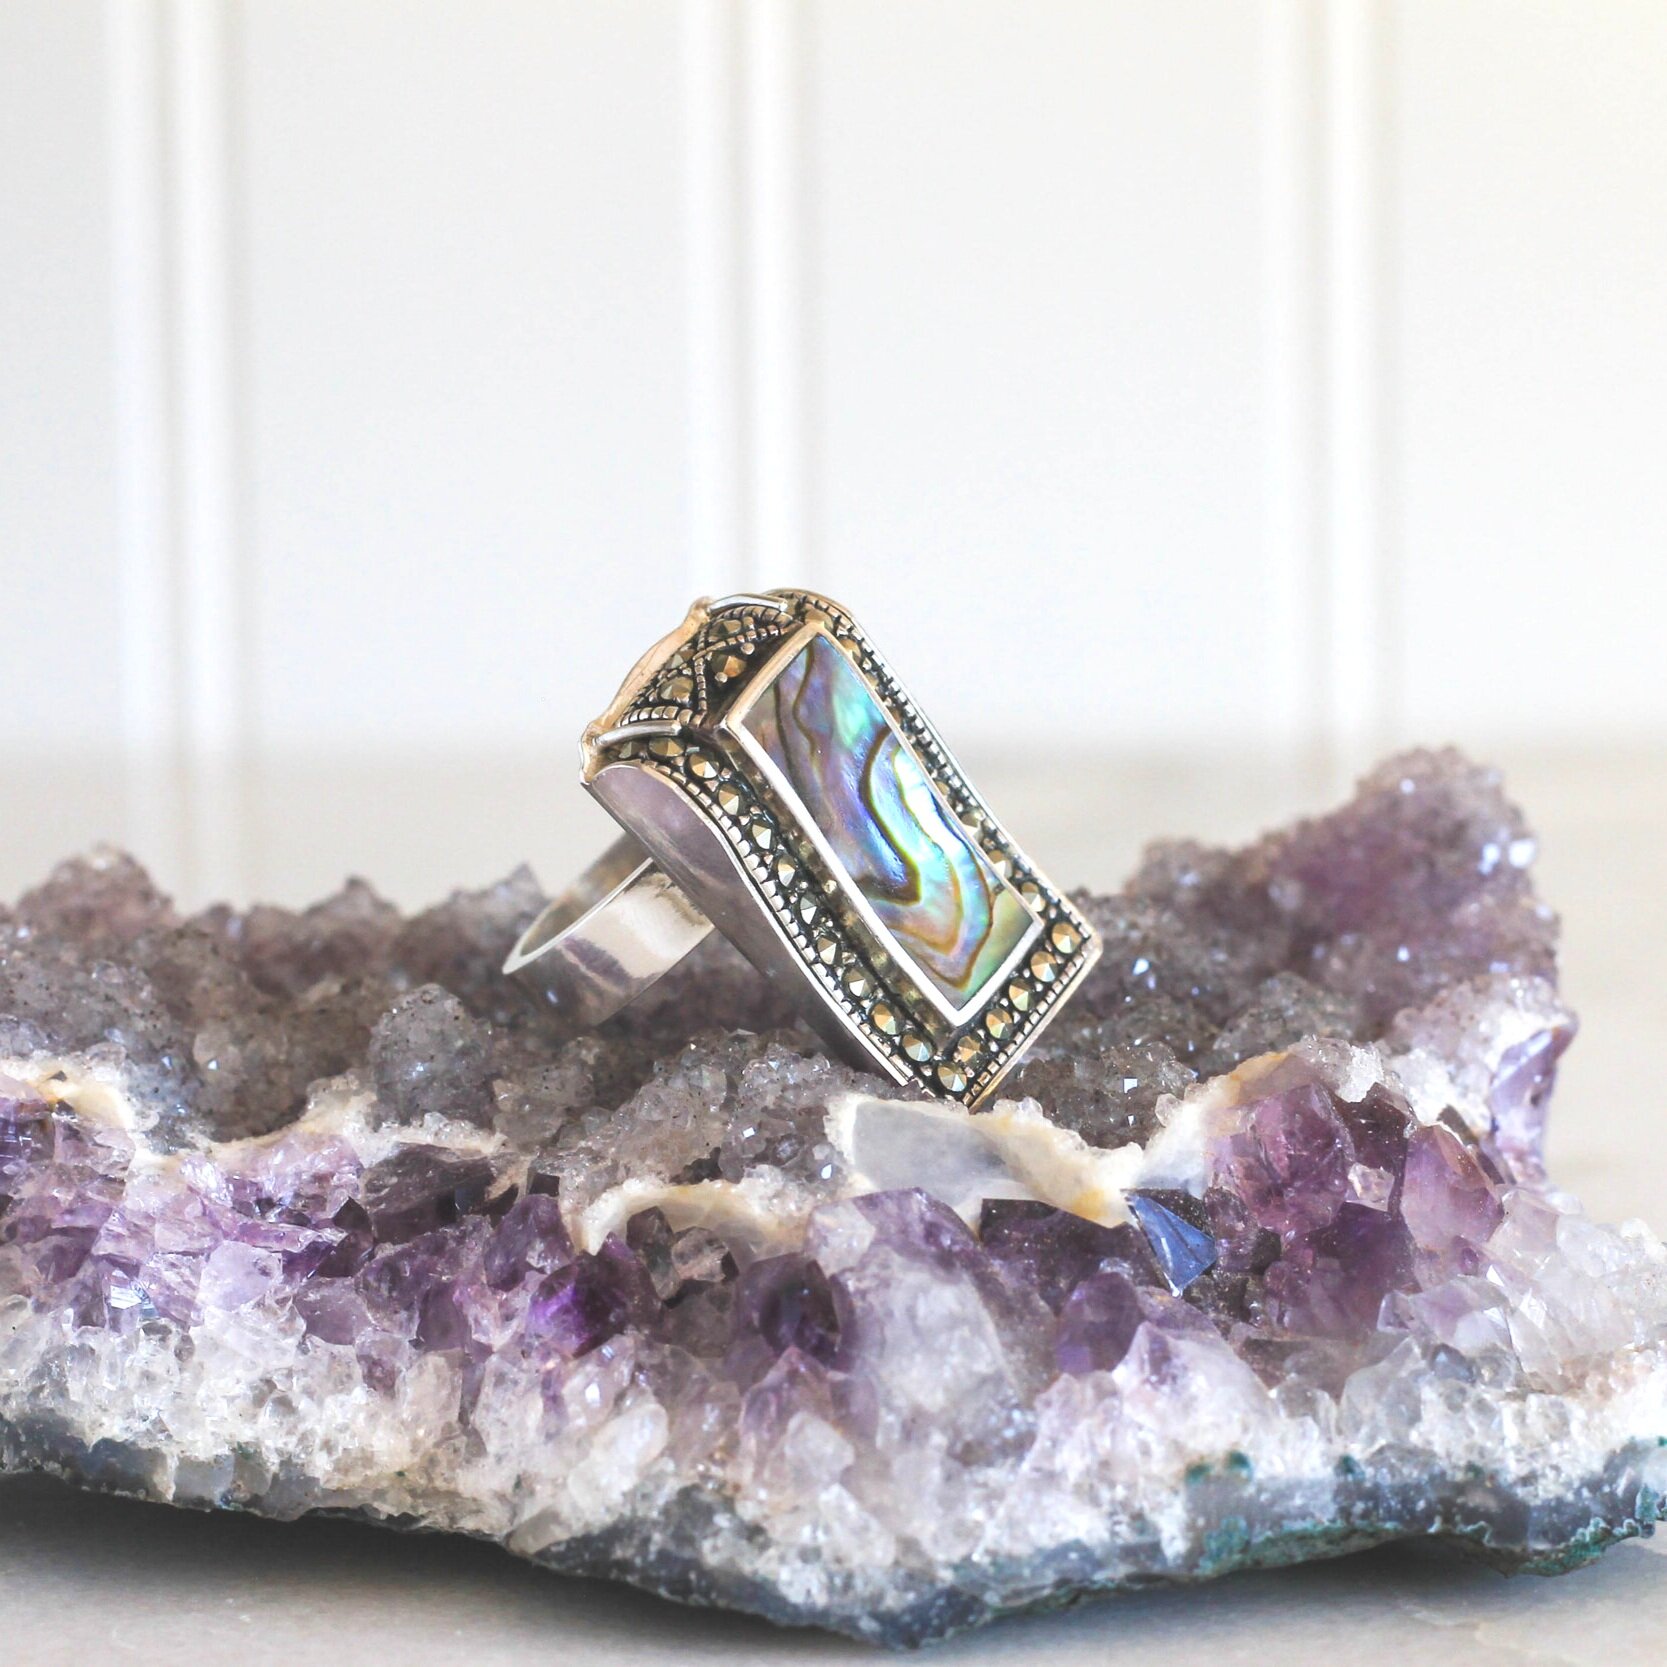 New Ring for Antique Abalone Pendant